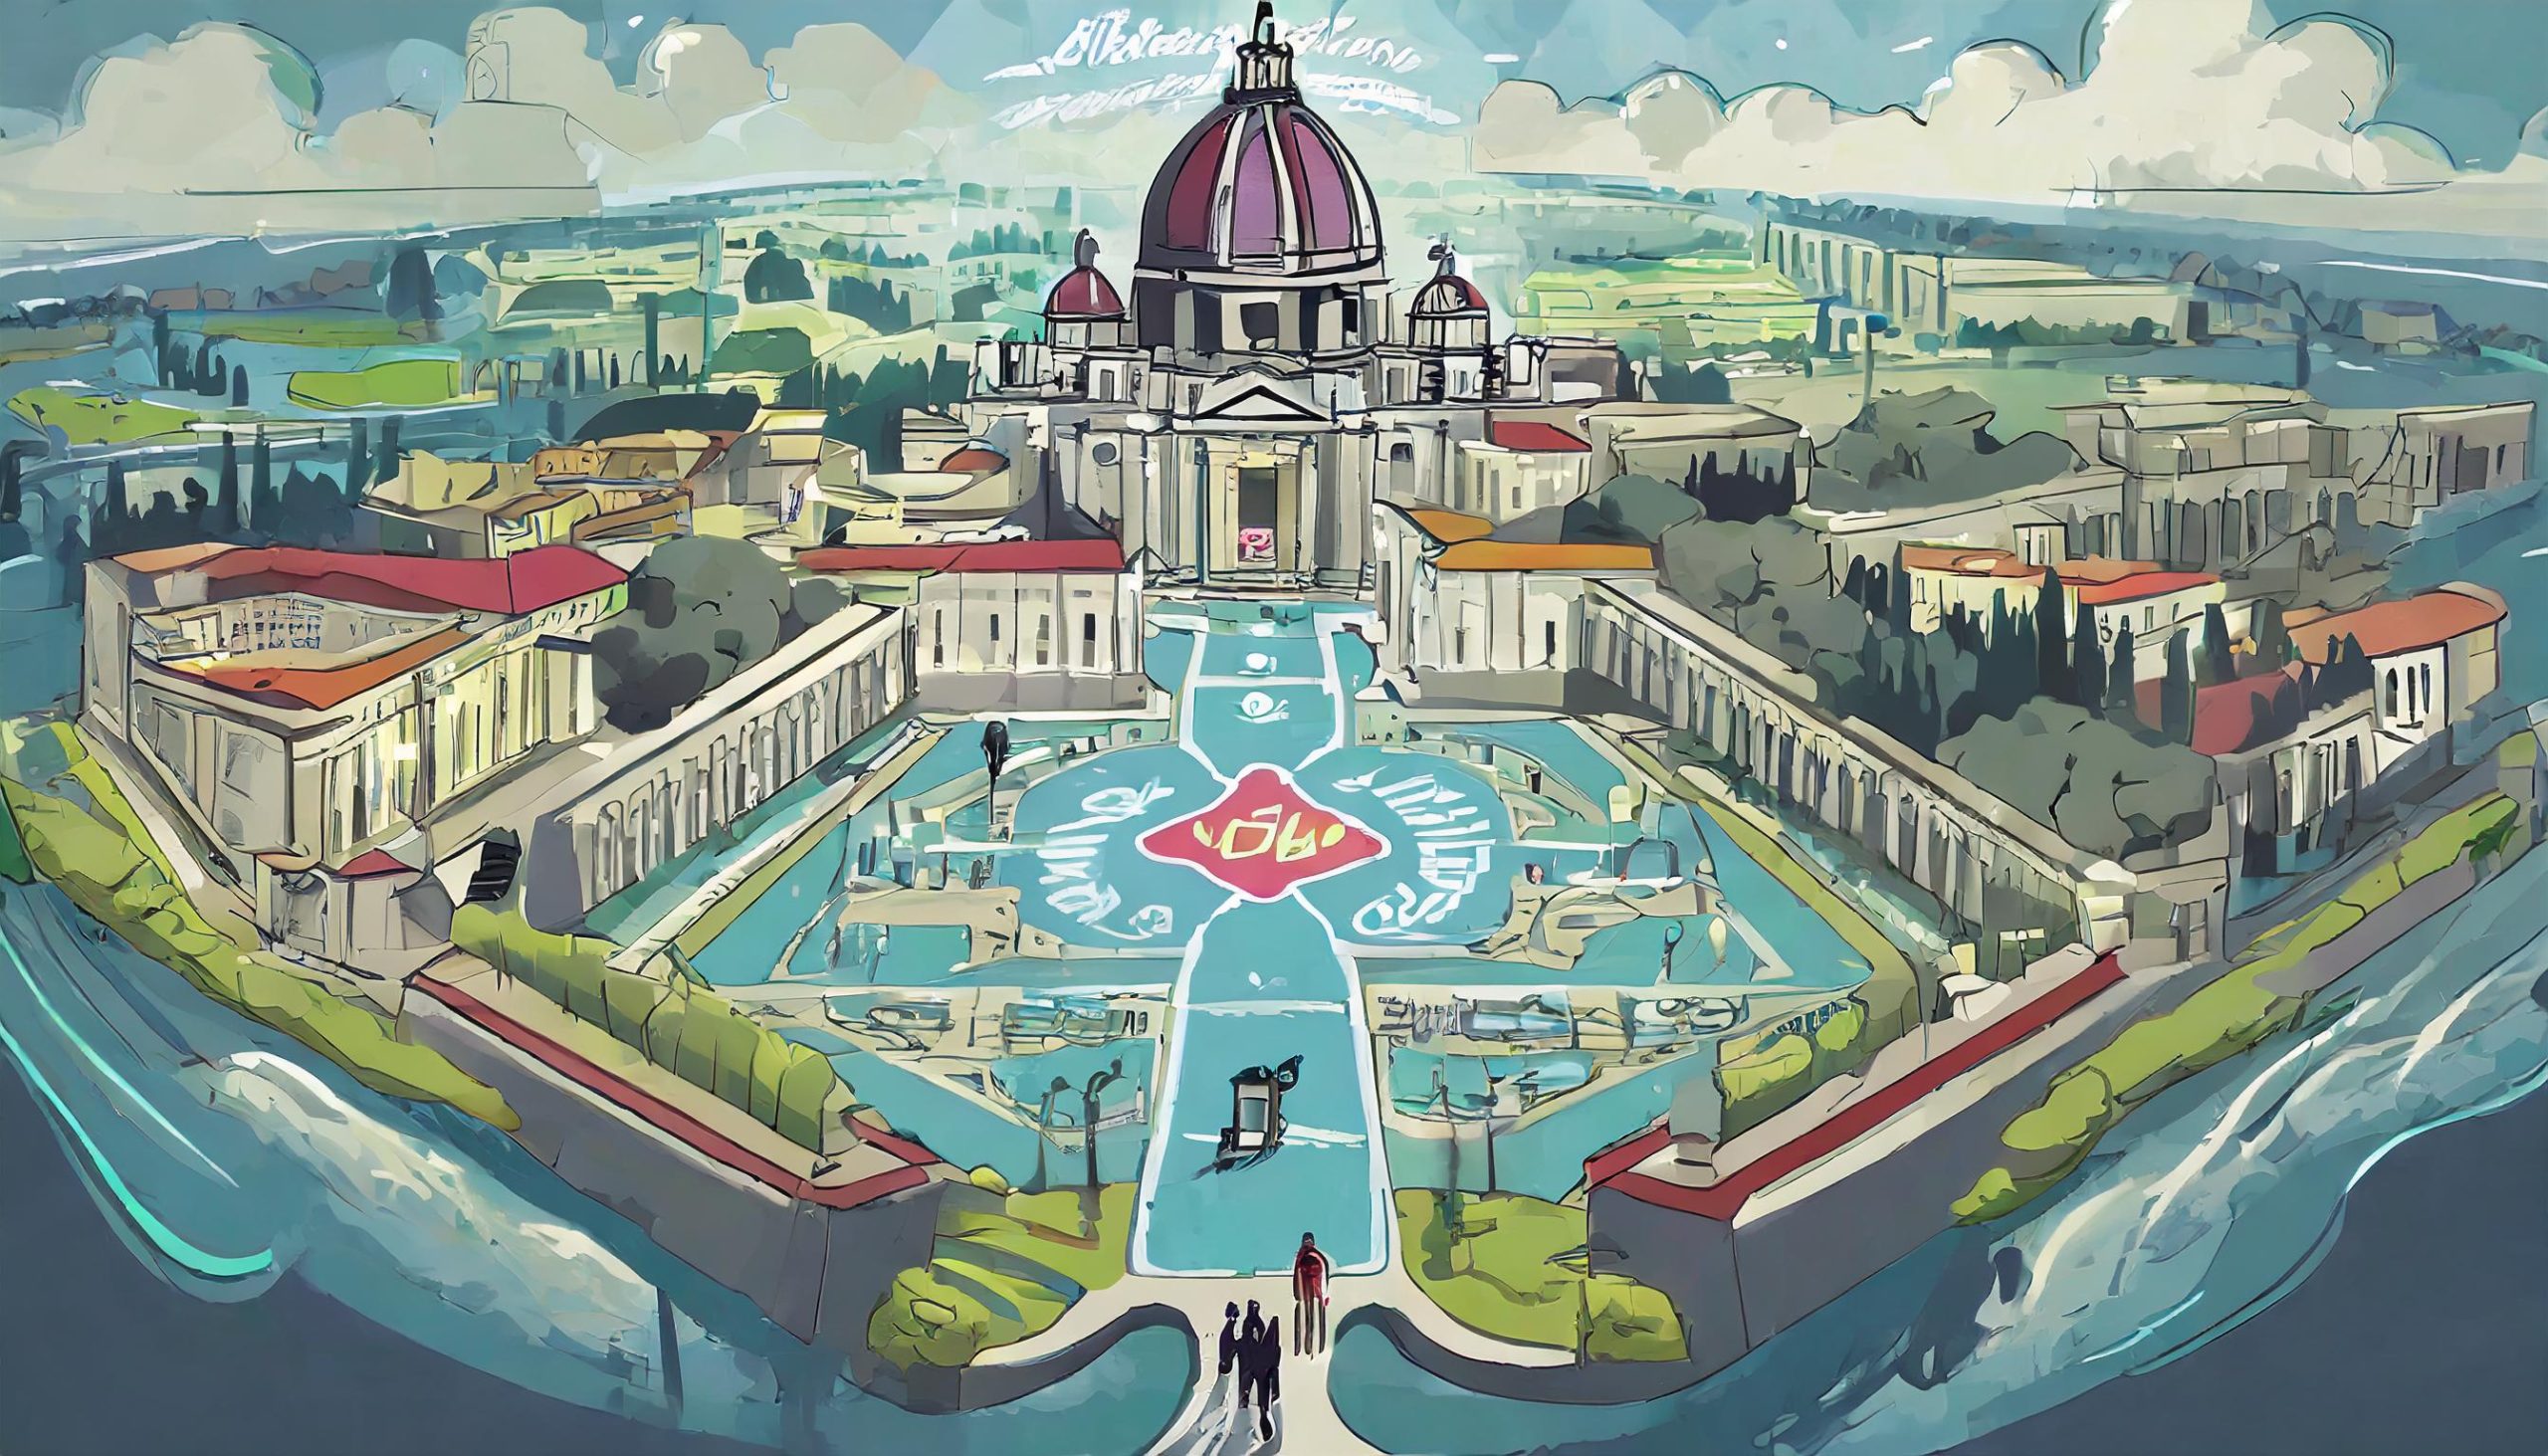 An illustration of the Vatican City